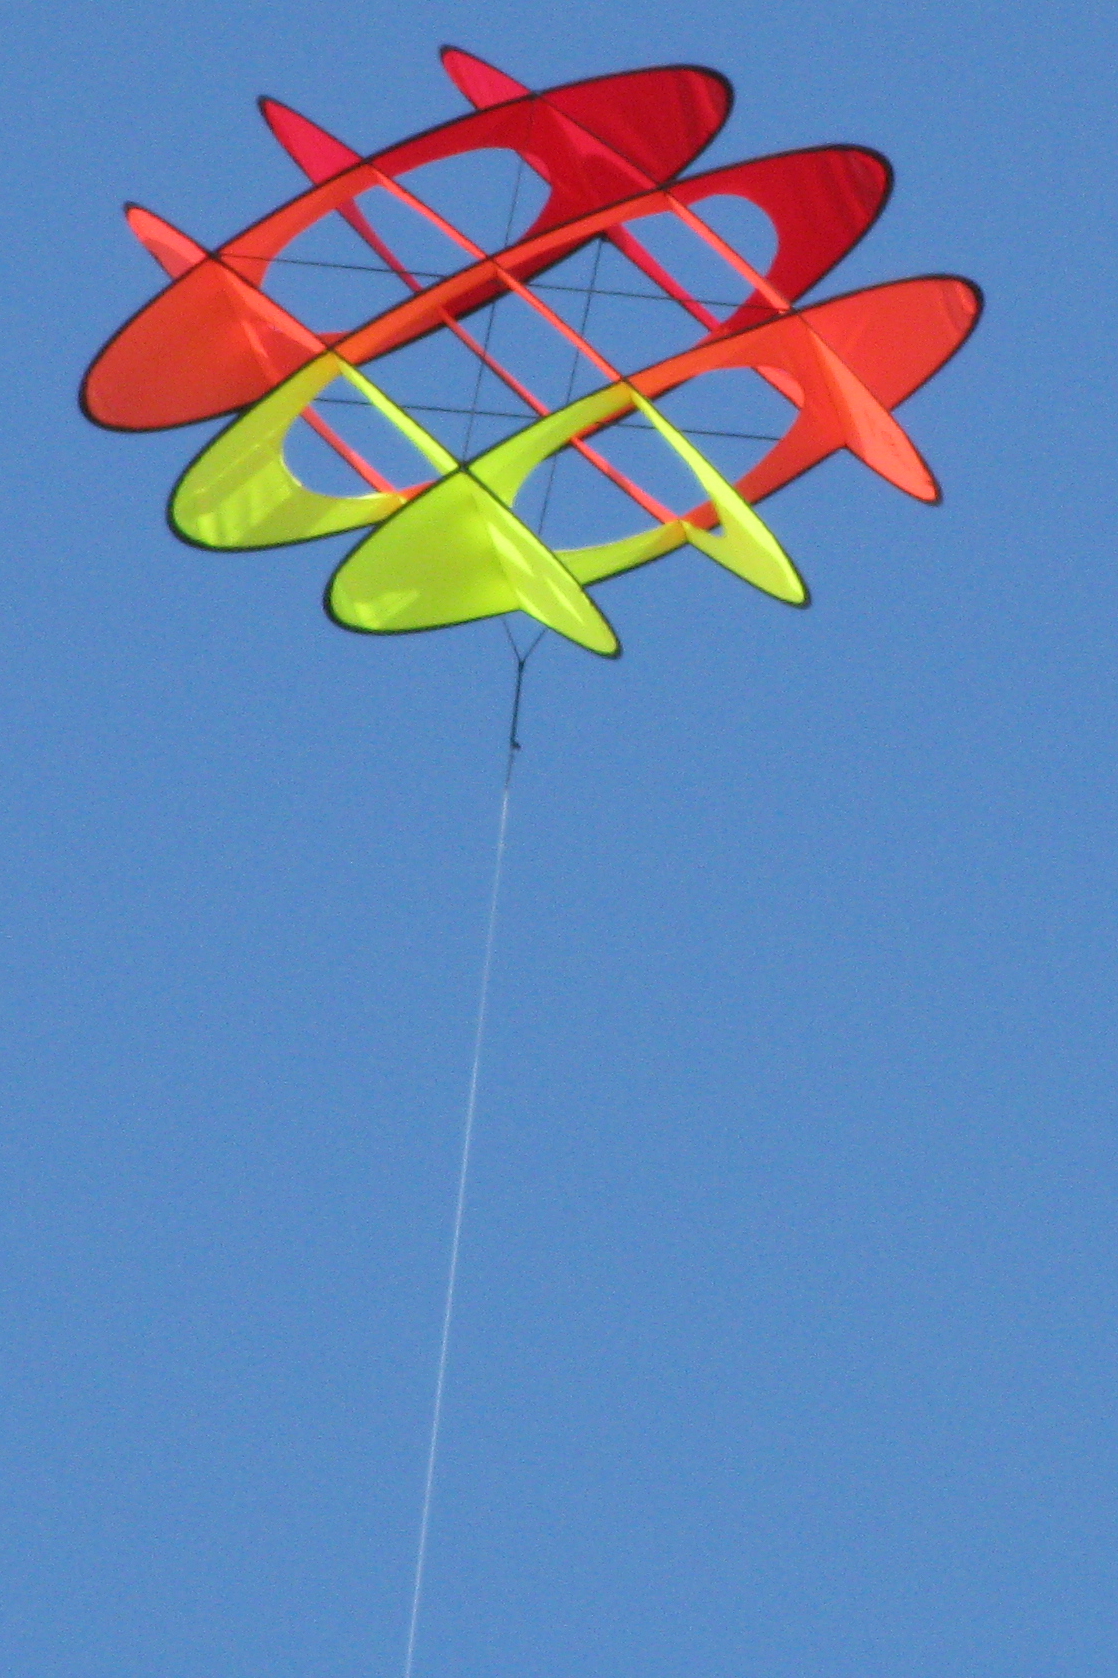 a kite that looks like three fish and is flying in the sky